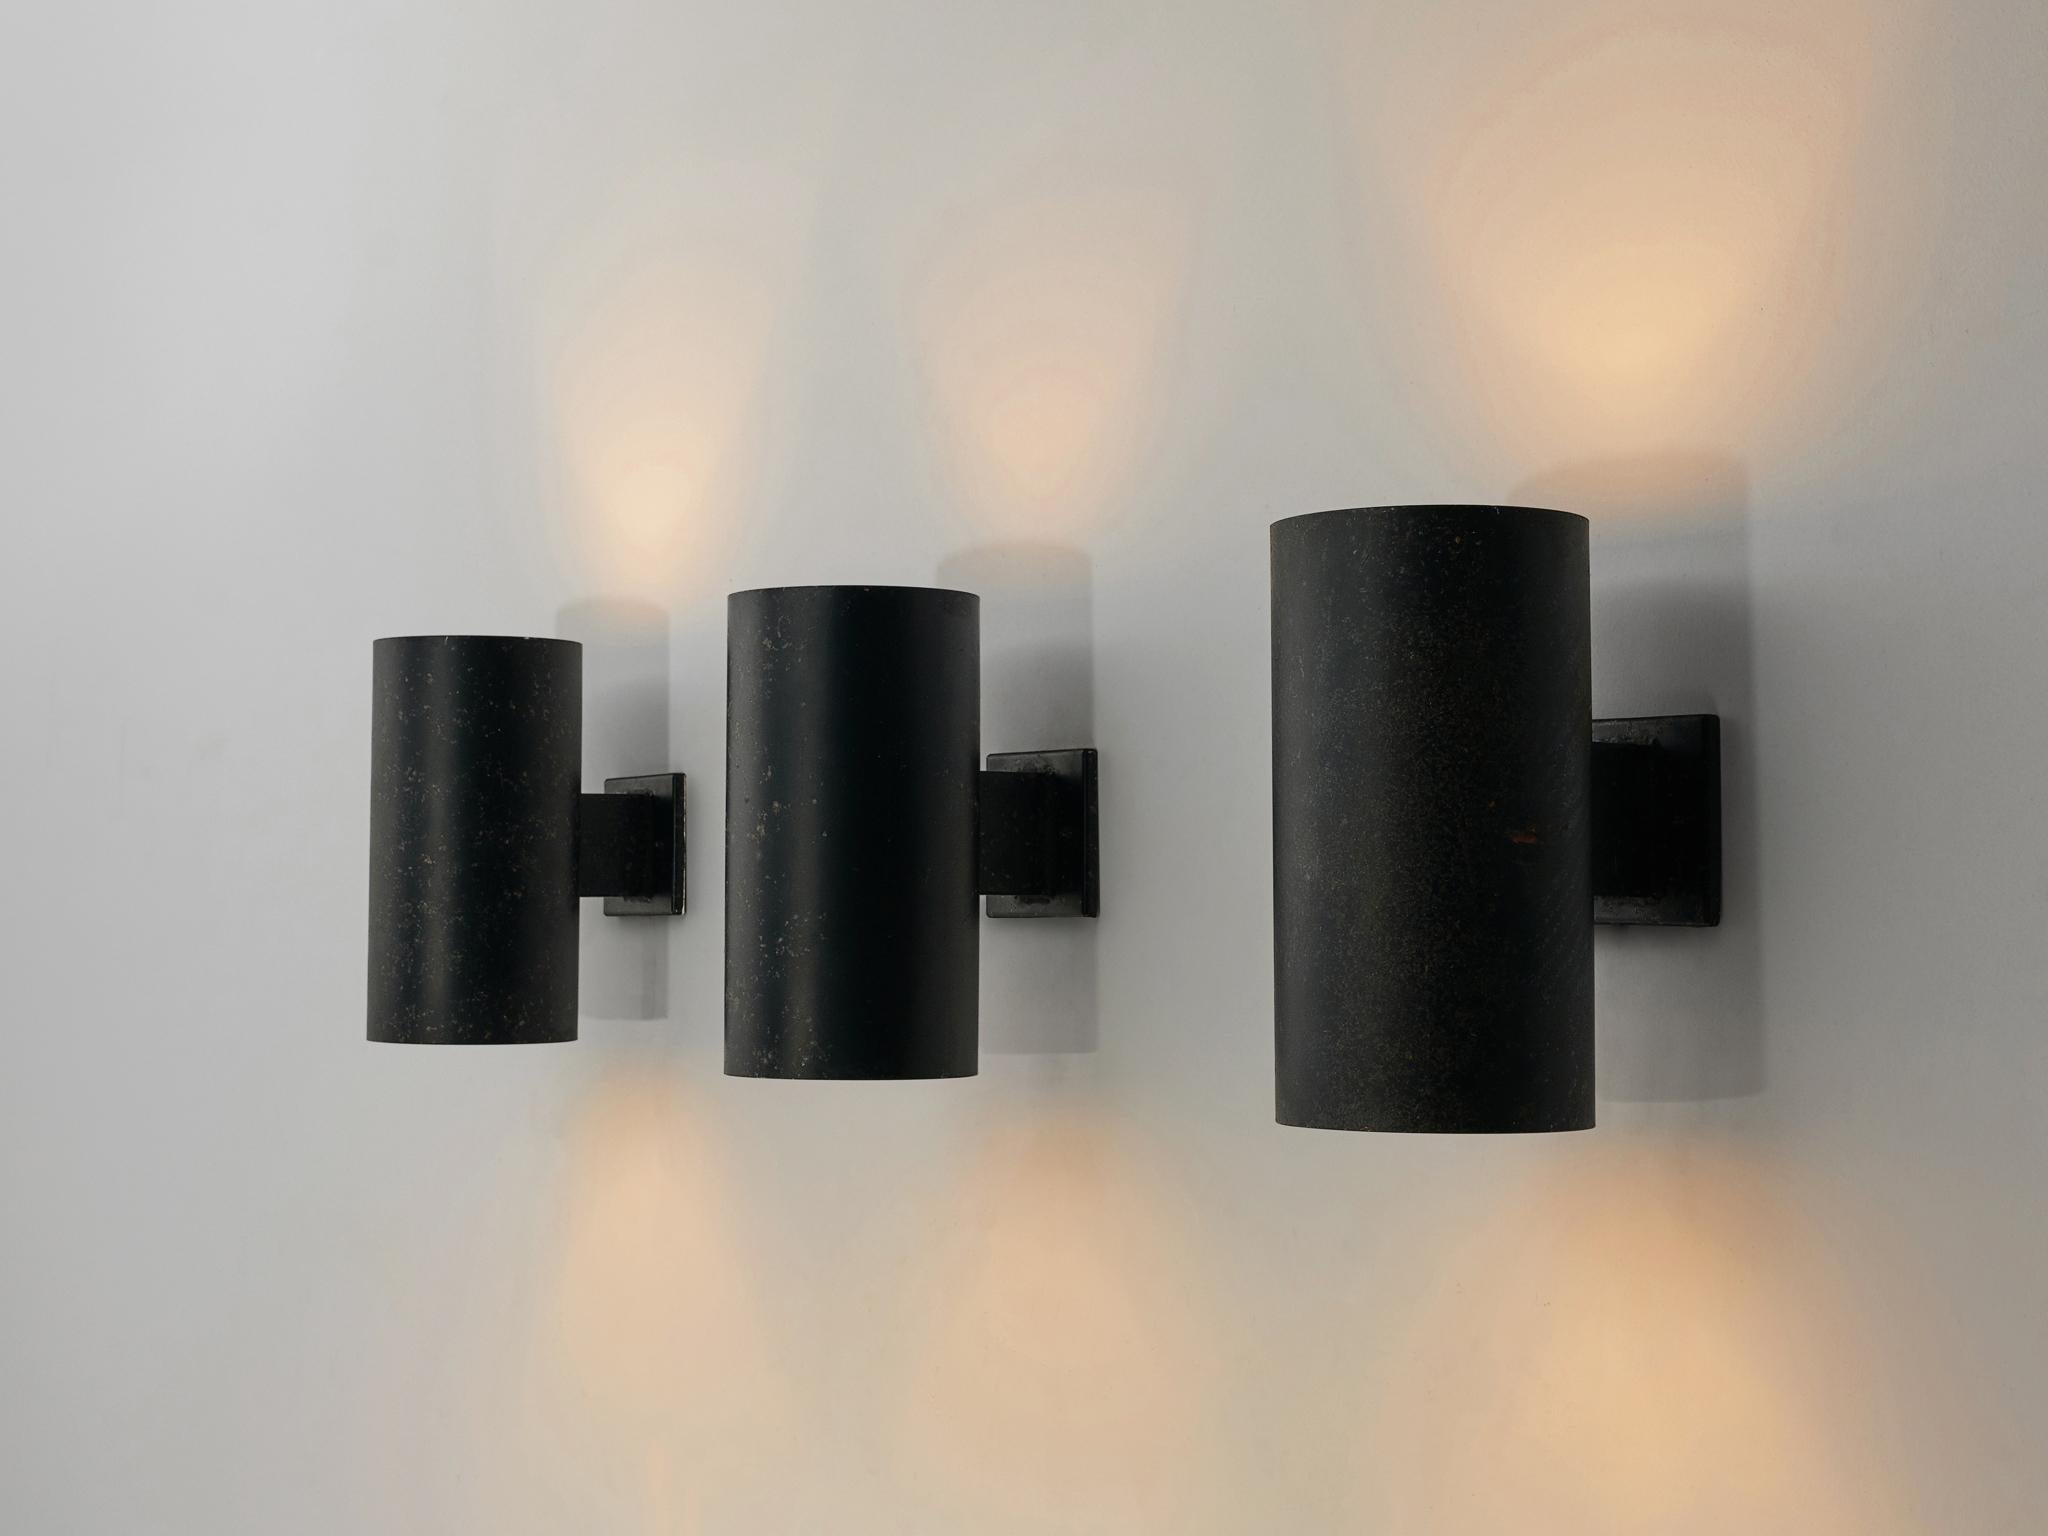 Louis Poulsen, wall lamps, lacquered metal, Denmark, 1950s

Wall lights by manufacturer Louis Poulsen. The lights have a strong simple shape. The black metal cones have a beautiful patina. Because of the cylindrical open shape of the lamp the